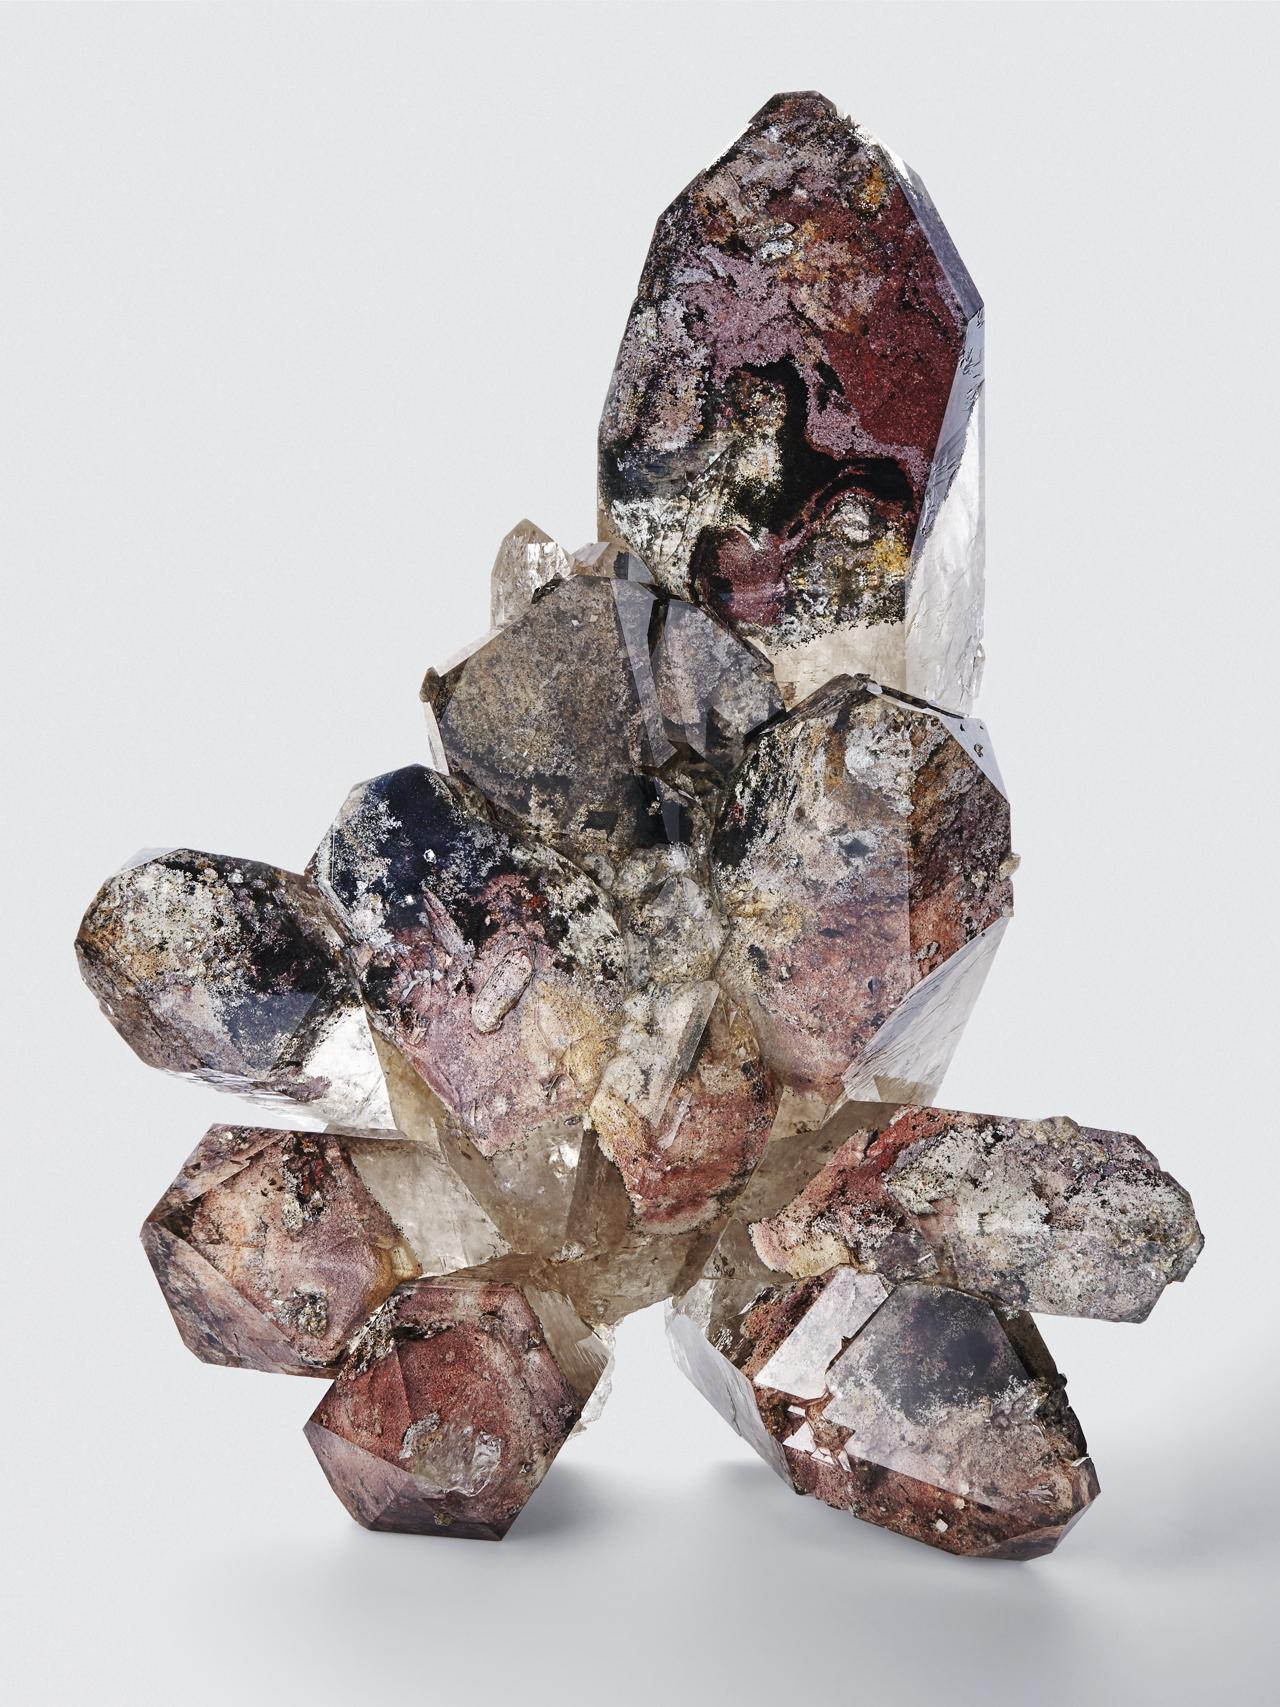 One of our specialties is inclusions. We have handled many of the world's finest known examples. I have never seen anything like this before. Normally you would find a single crystal like this, never a cluster, and never this large. The colors of